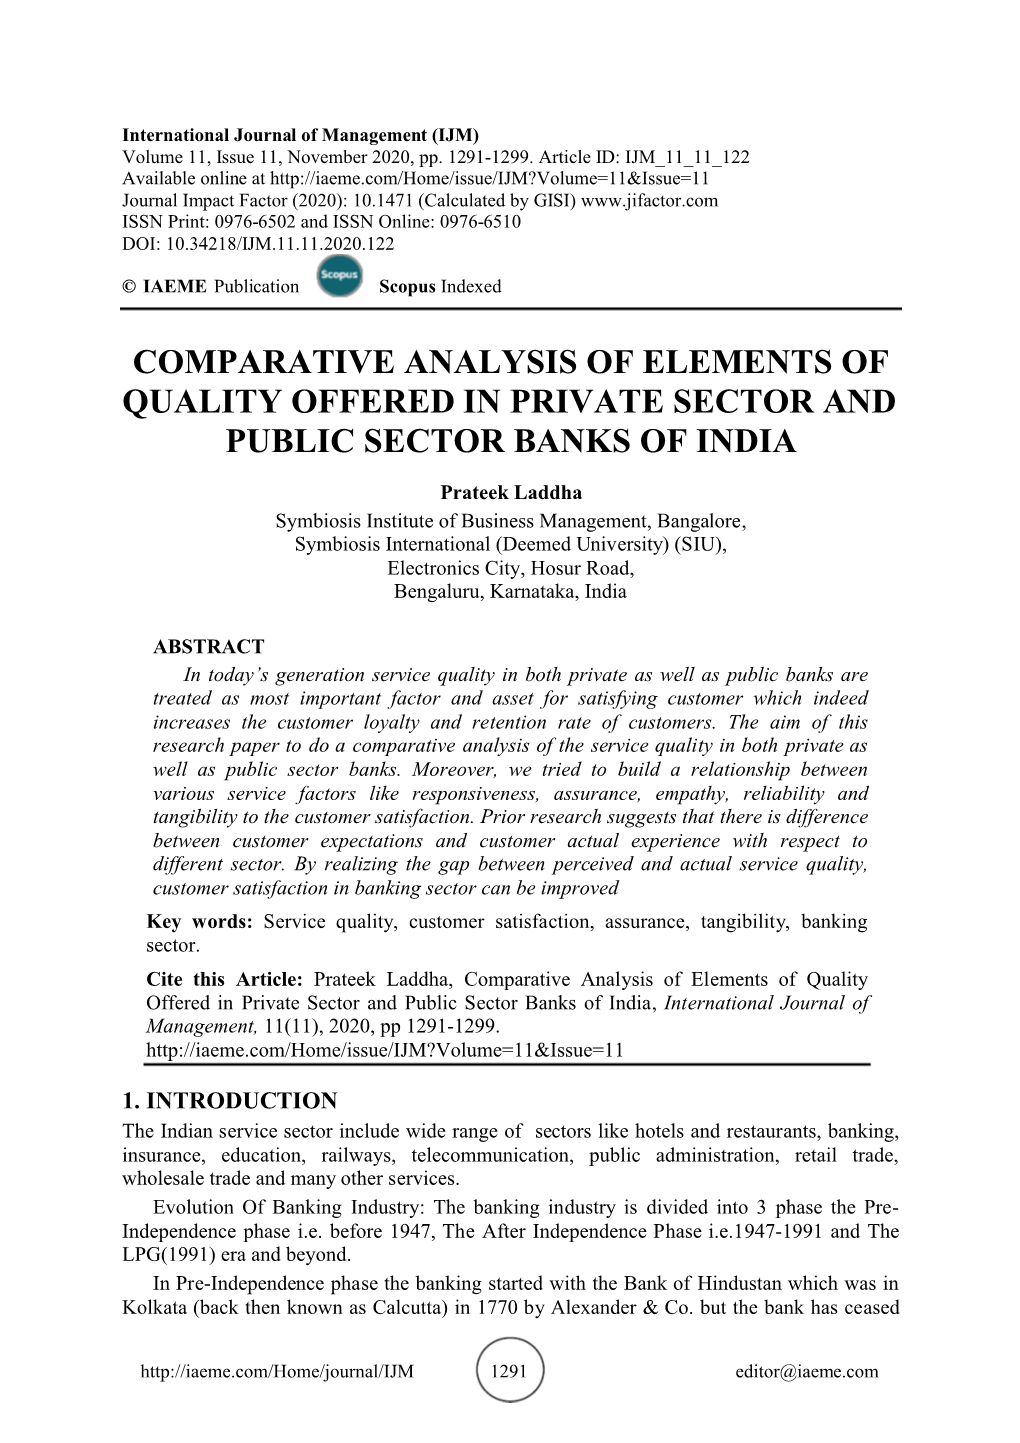 Comparative Analysis of Elements of Quality Offered in Private Sector and Public Sector Banks of India